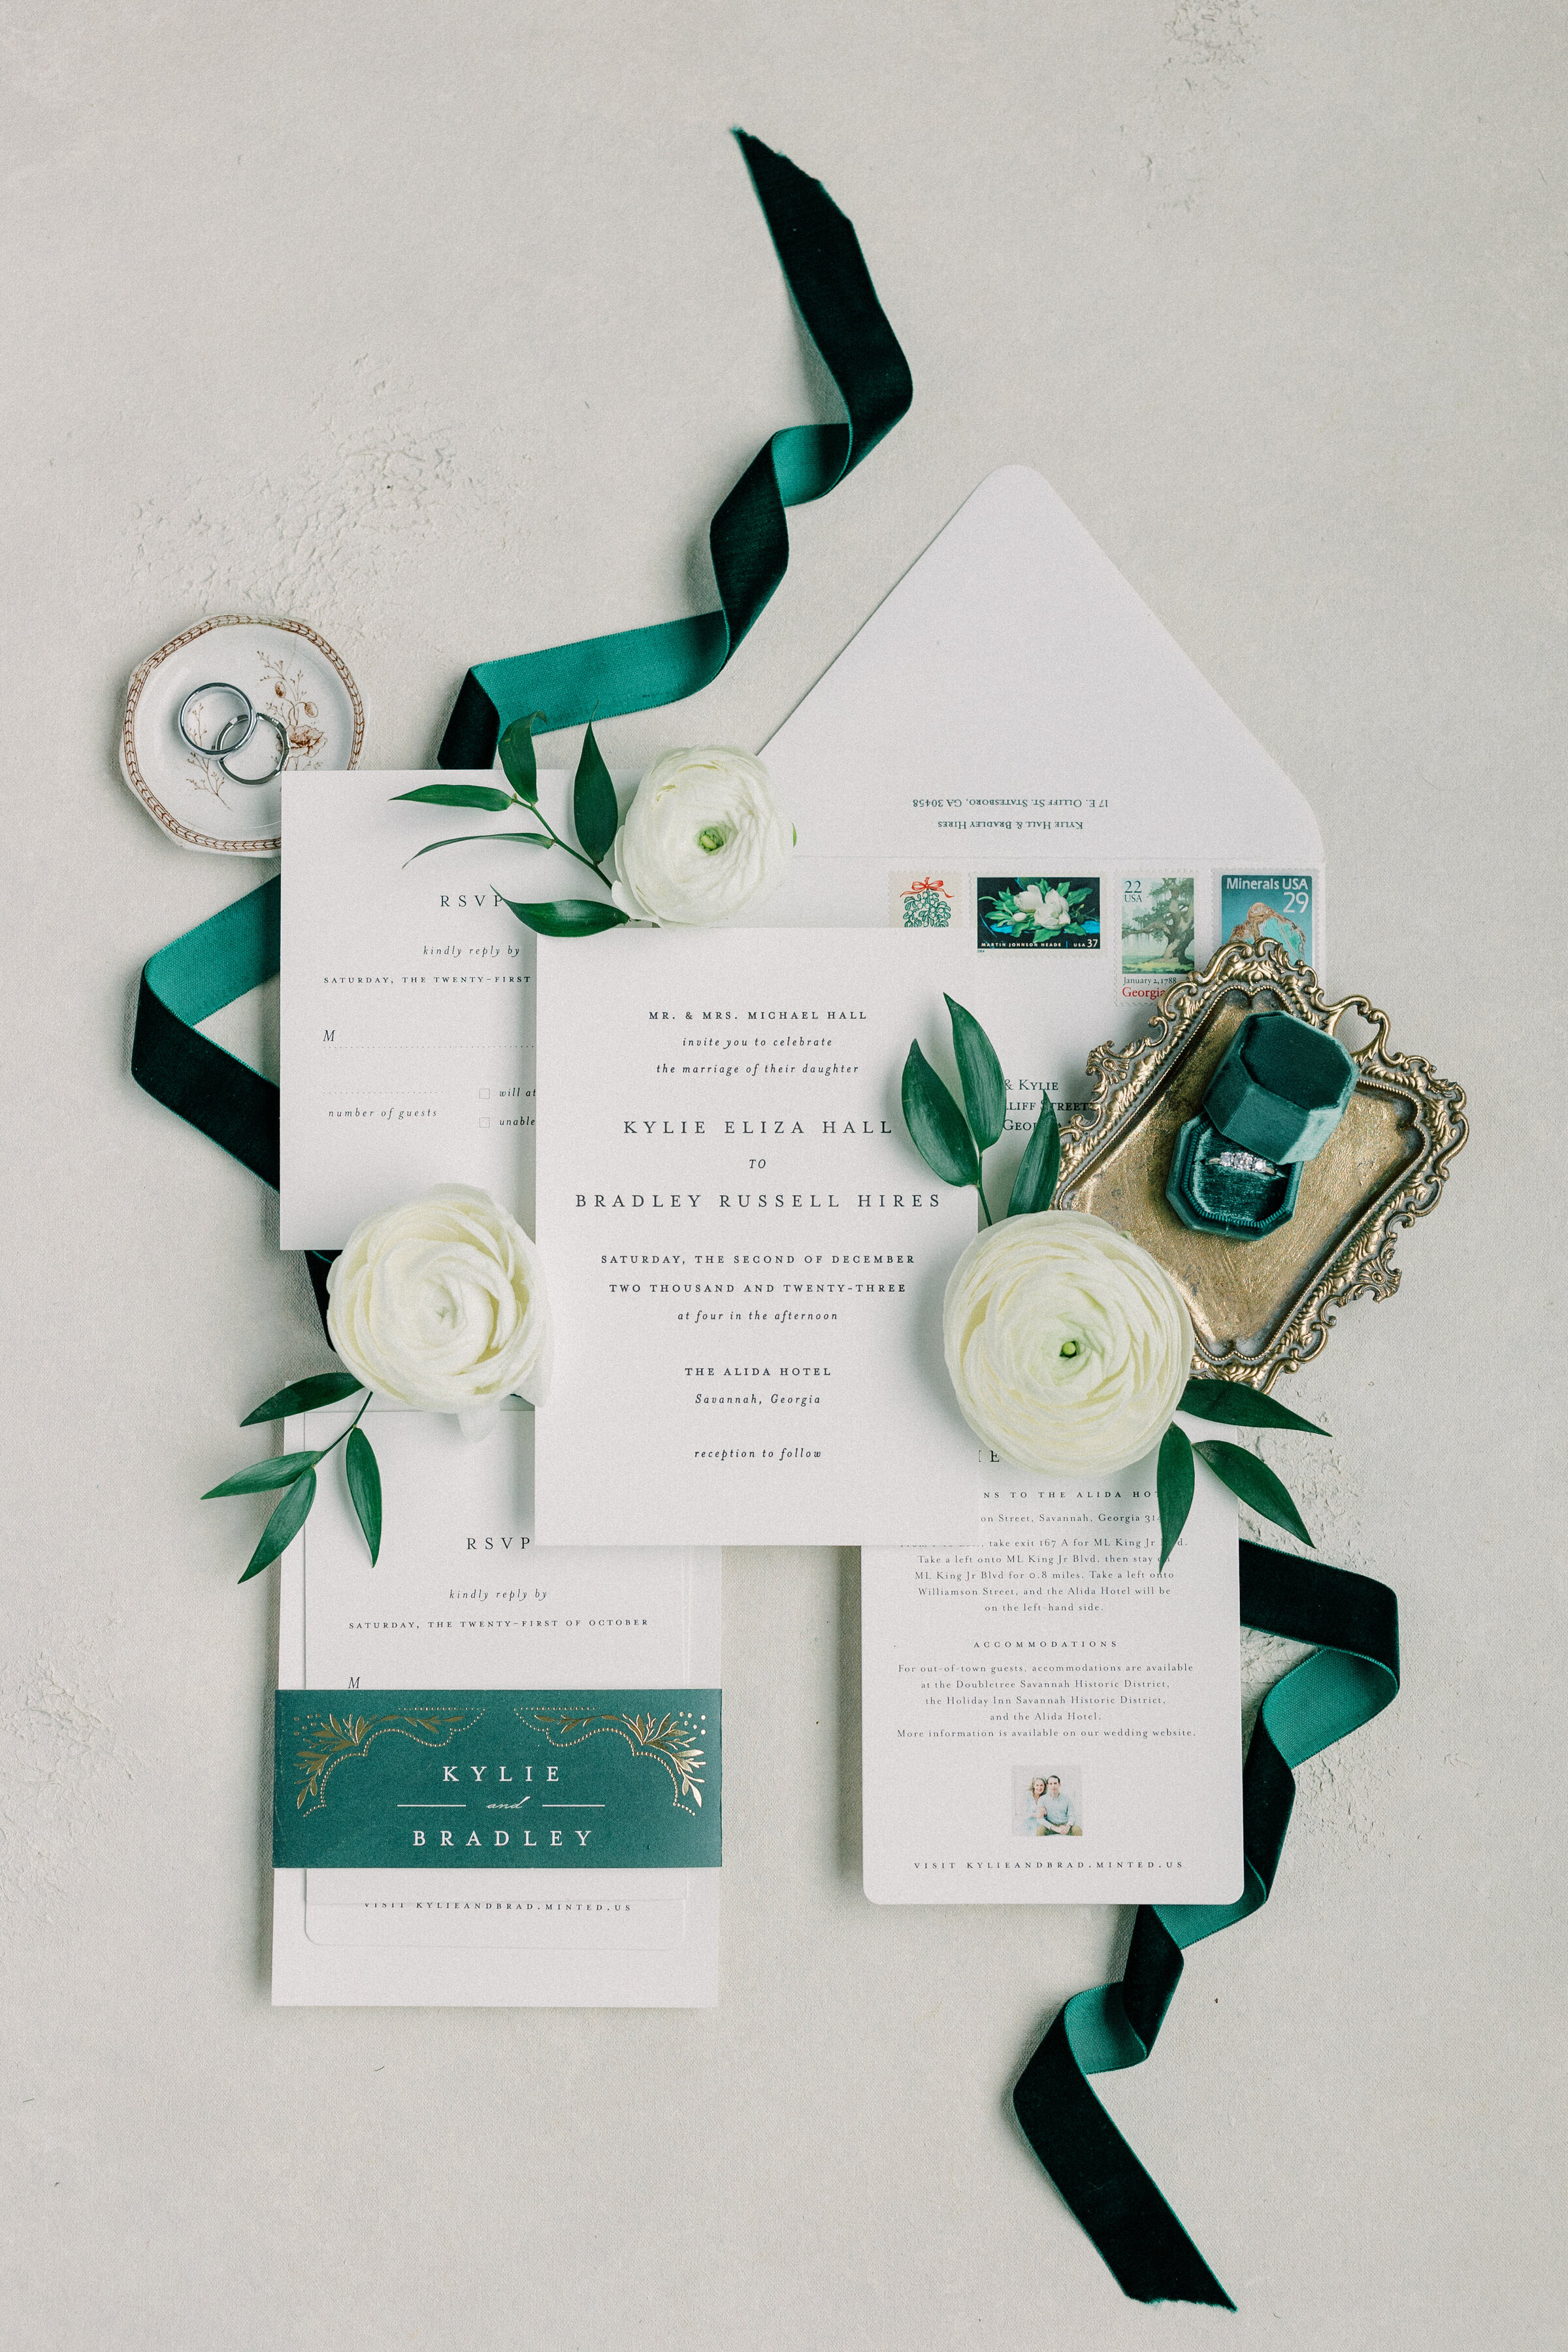 Invitation Suit with wedding rings, green trem, and white flowers